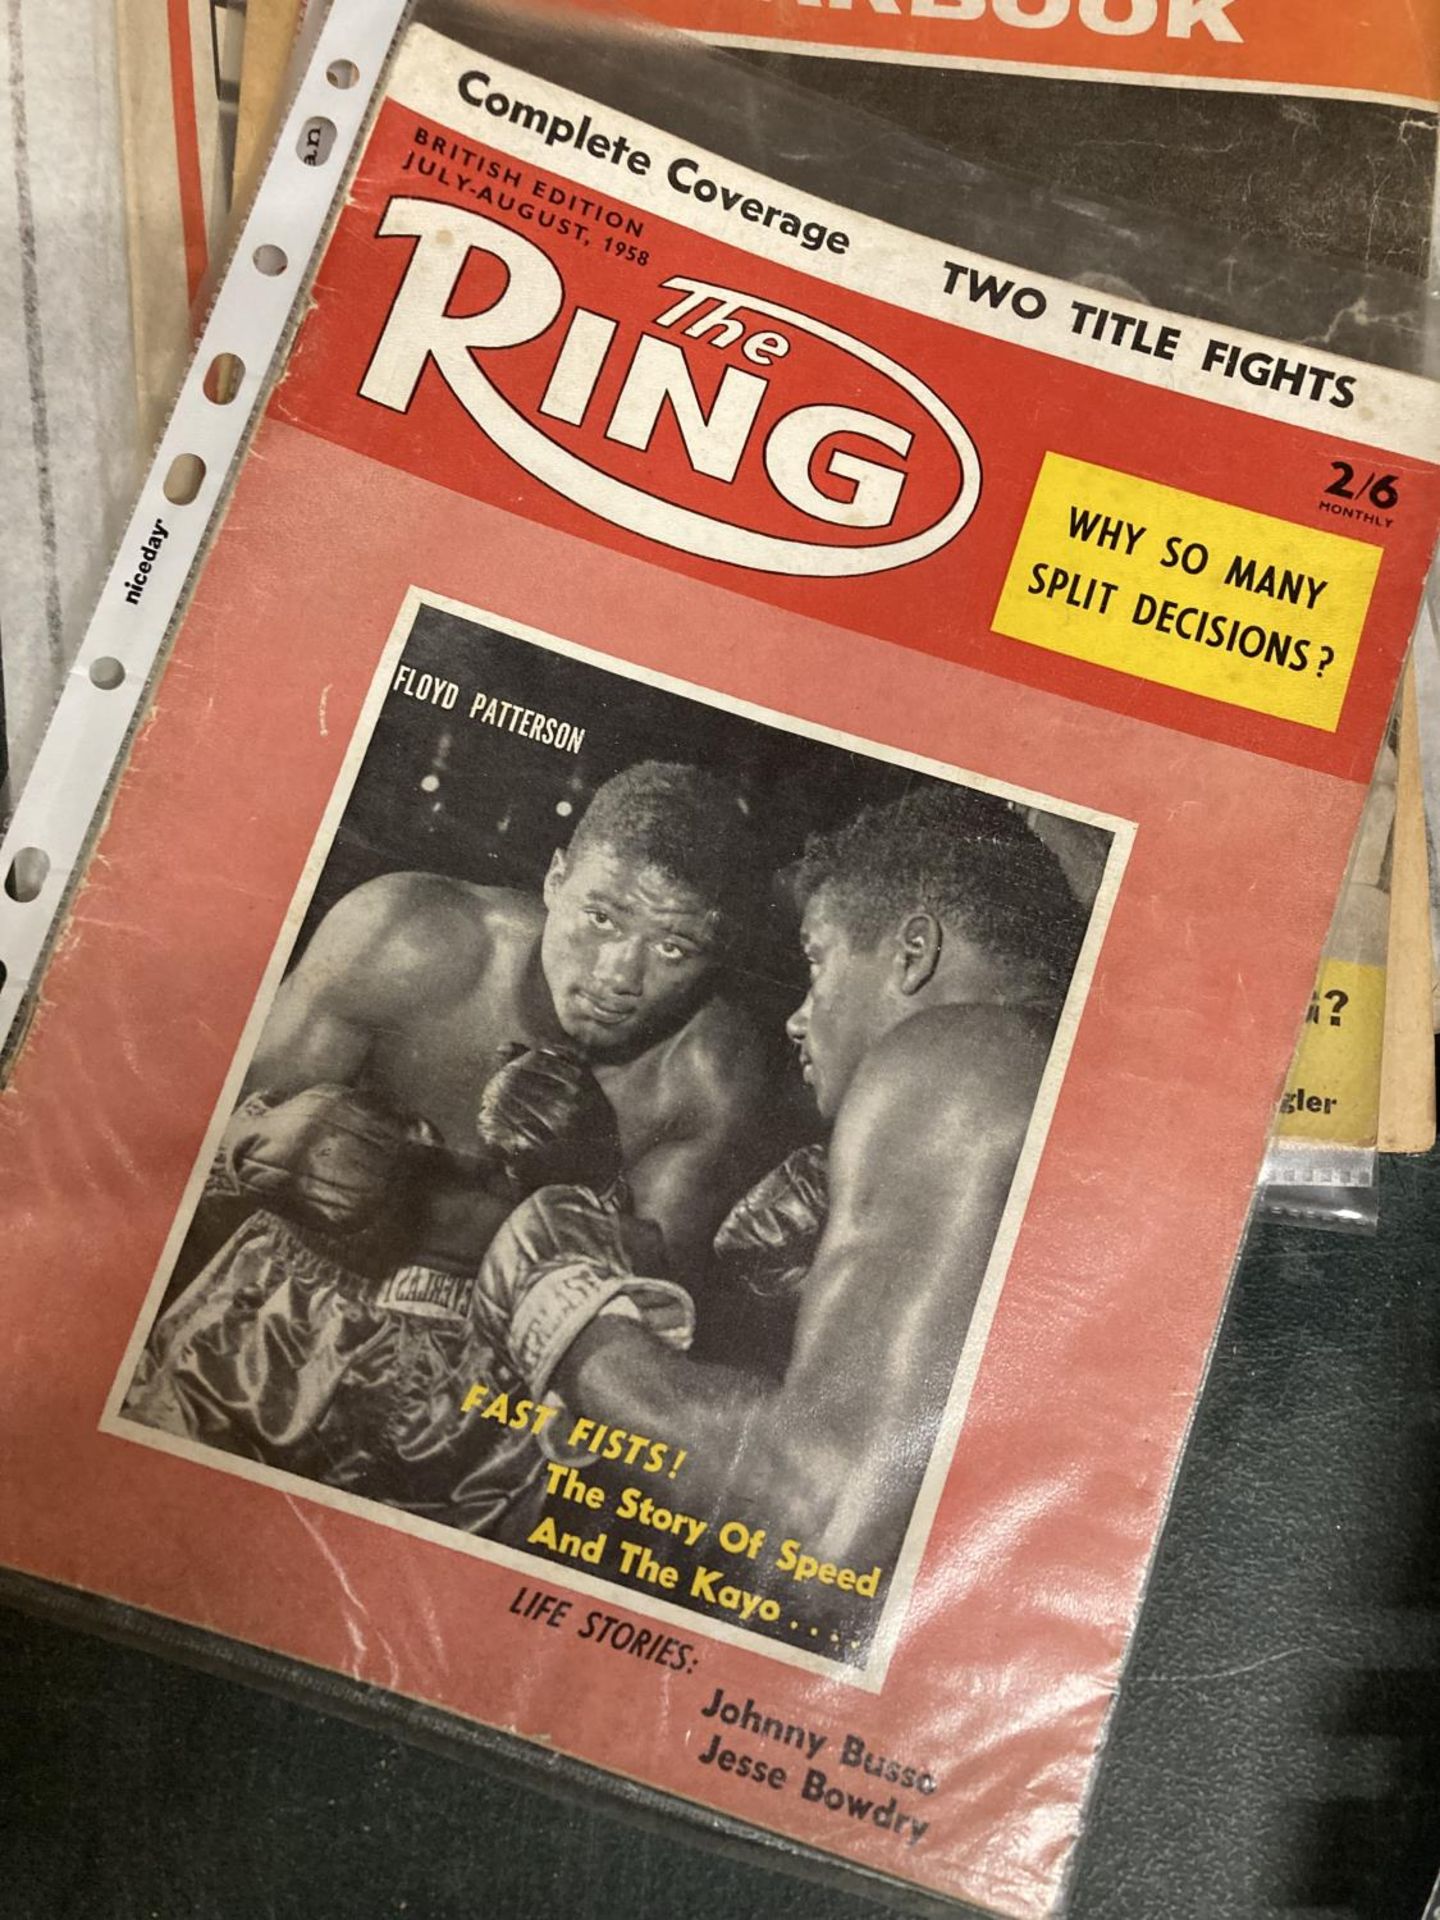 A COLLECTION OF VINTAGE BOXING ITEMS TO INCLUDE GLOVES, BOOK AND MAGAZINES - Image 6 of 7